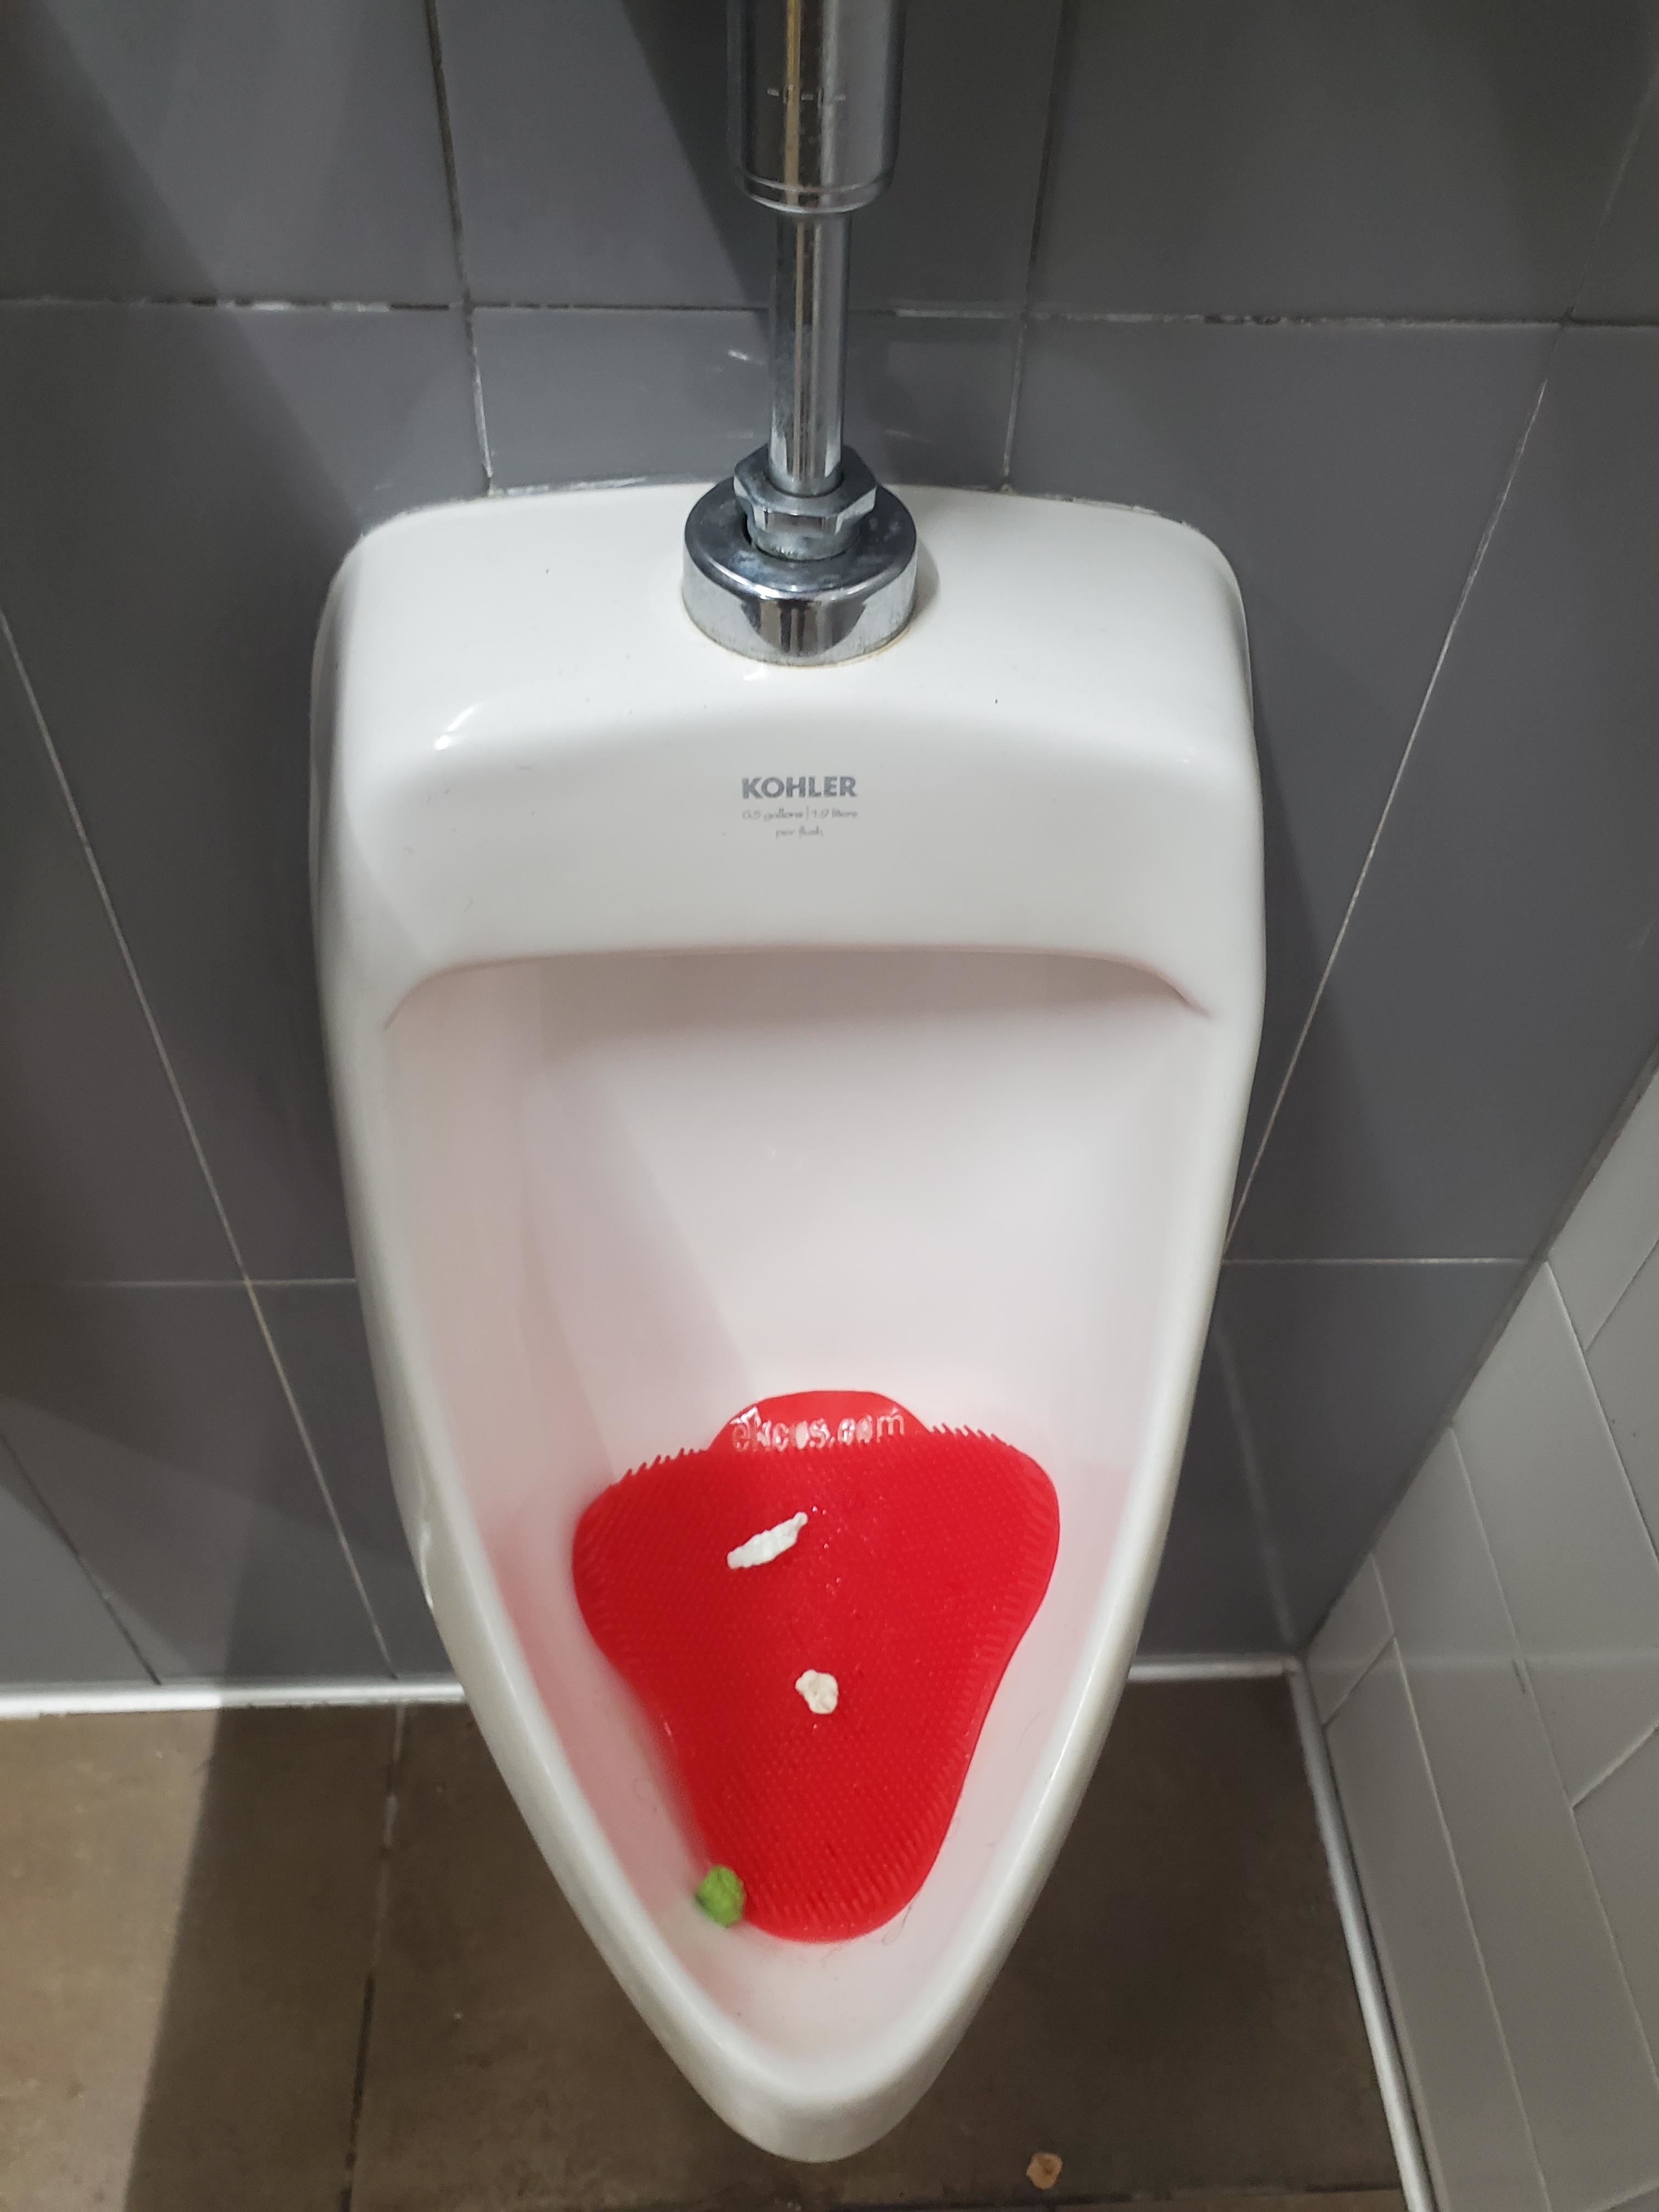 Urinal with a red deodorizer block inside that people threw gum into, against a gray tiled wall